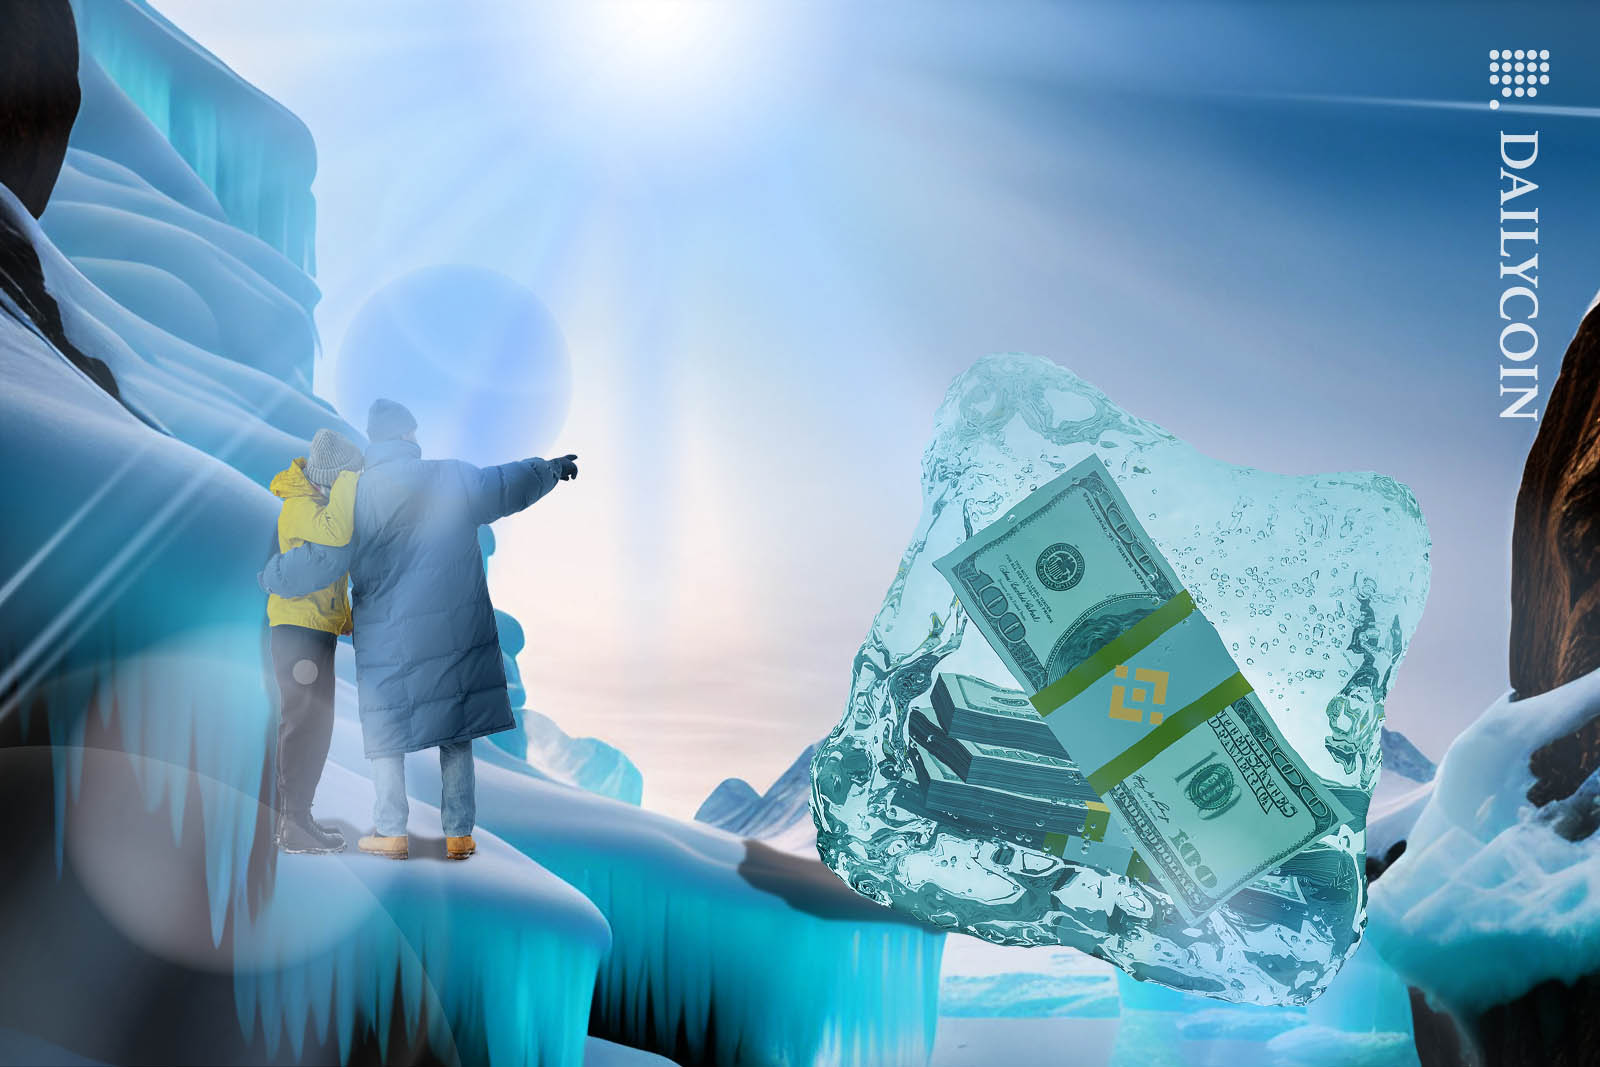 Couple pointing at some money frozen in ice in an icey northern landscape.